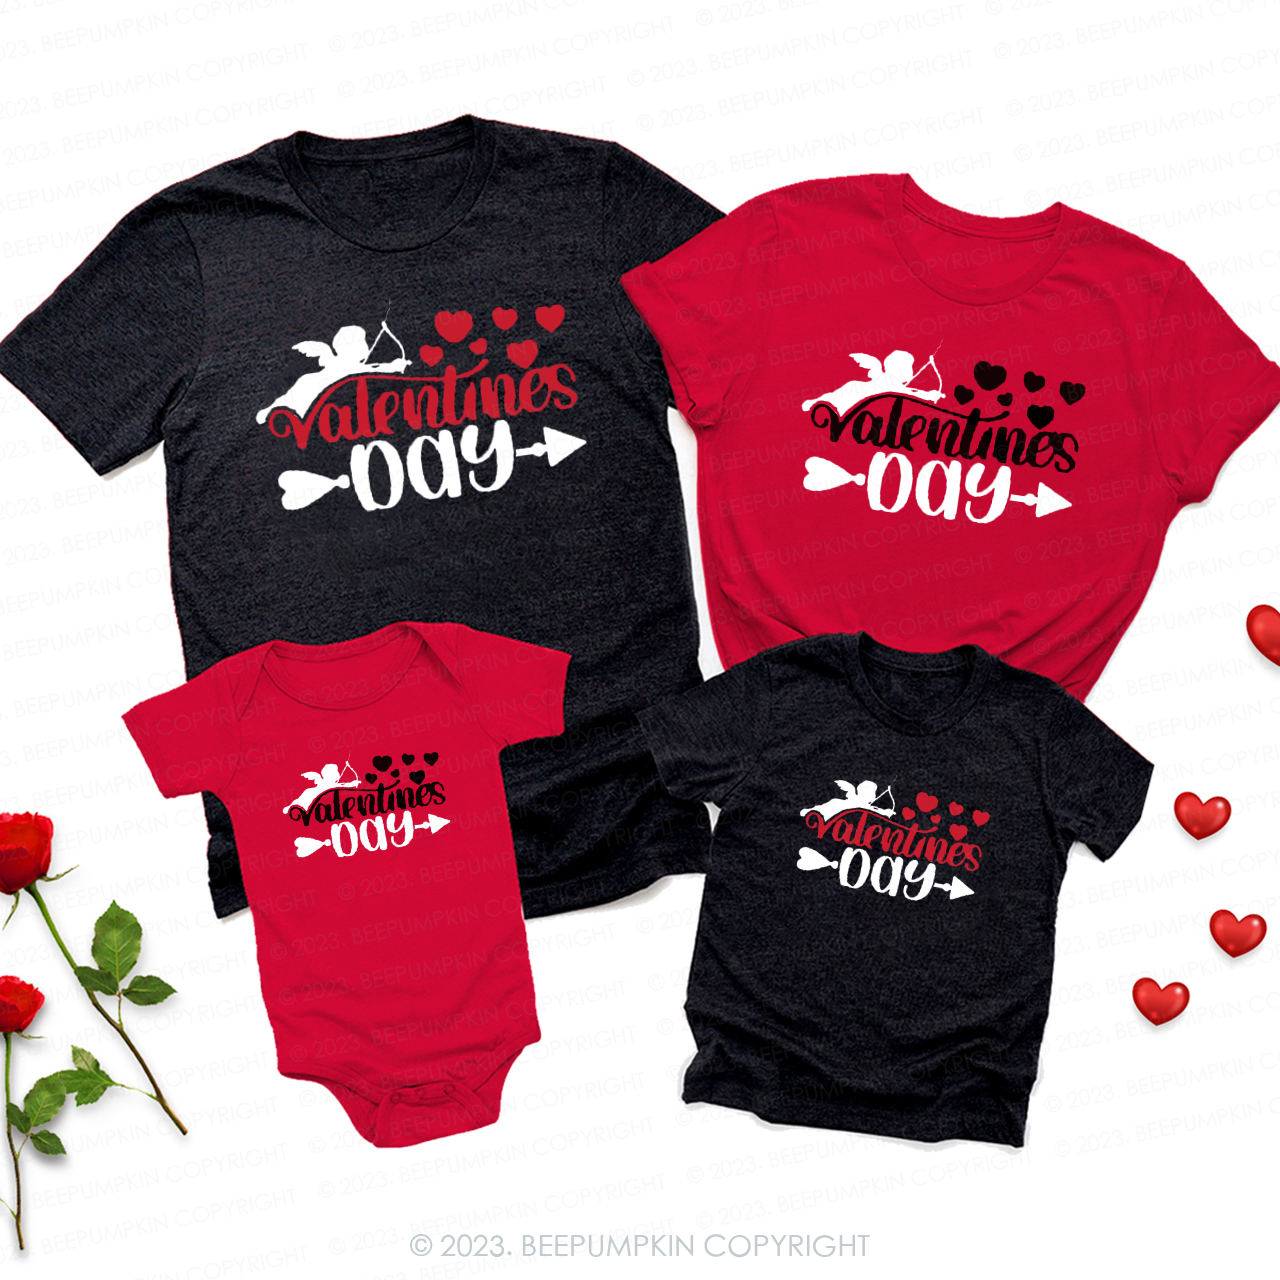 Cupid Shoots Arrow of Love Valentines Day Shirts